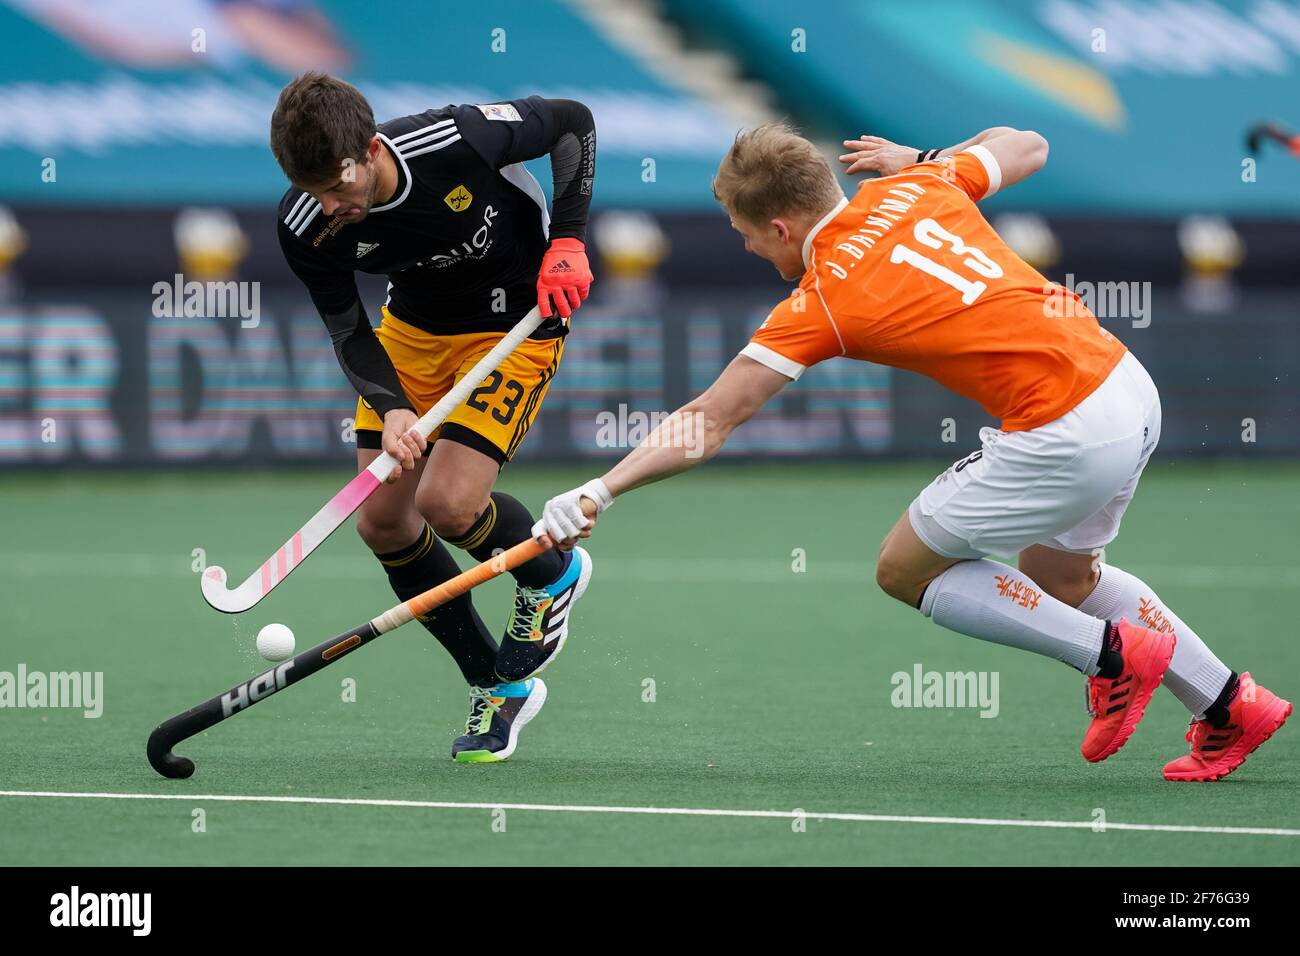 AMSTELVEEN, NETHERLANDS - APRIL 5: Joan Tarres of Atletic Terrassa HC and Jasper Brinkman of Bloemendaal during the Euro Hockey League Final match between Atletic Terrassa HC and Bloemendaal at Wagener Stadion on April 5, 2021 in Amstelveen, Netherlands (Photo by Andre Weening/Orange Pictures) Stock Photo